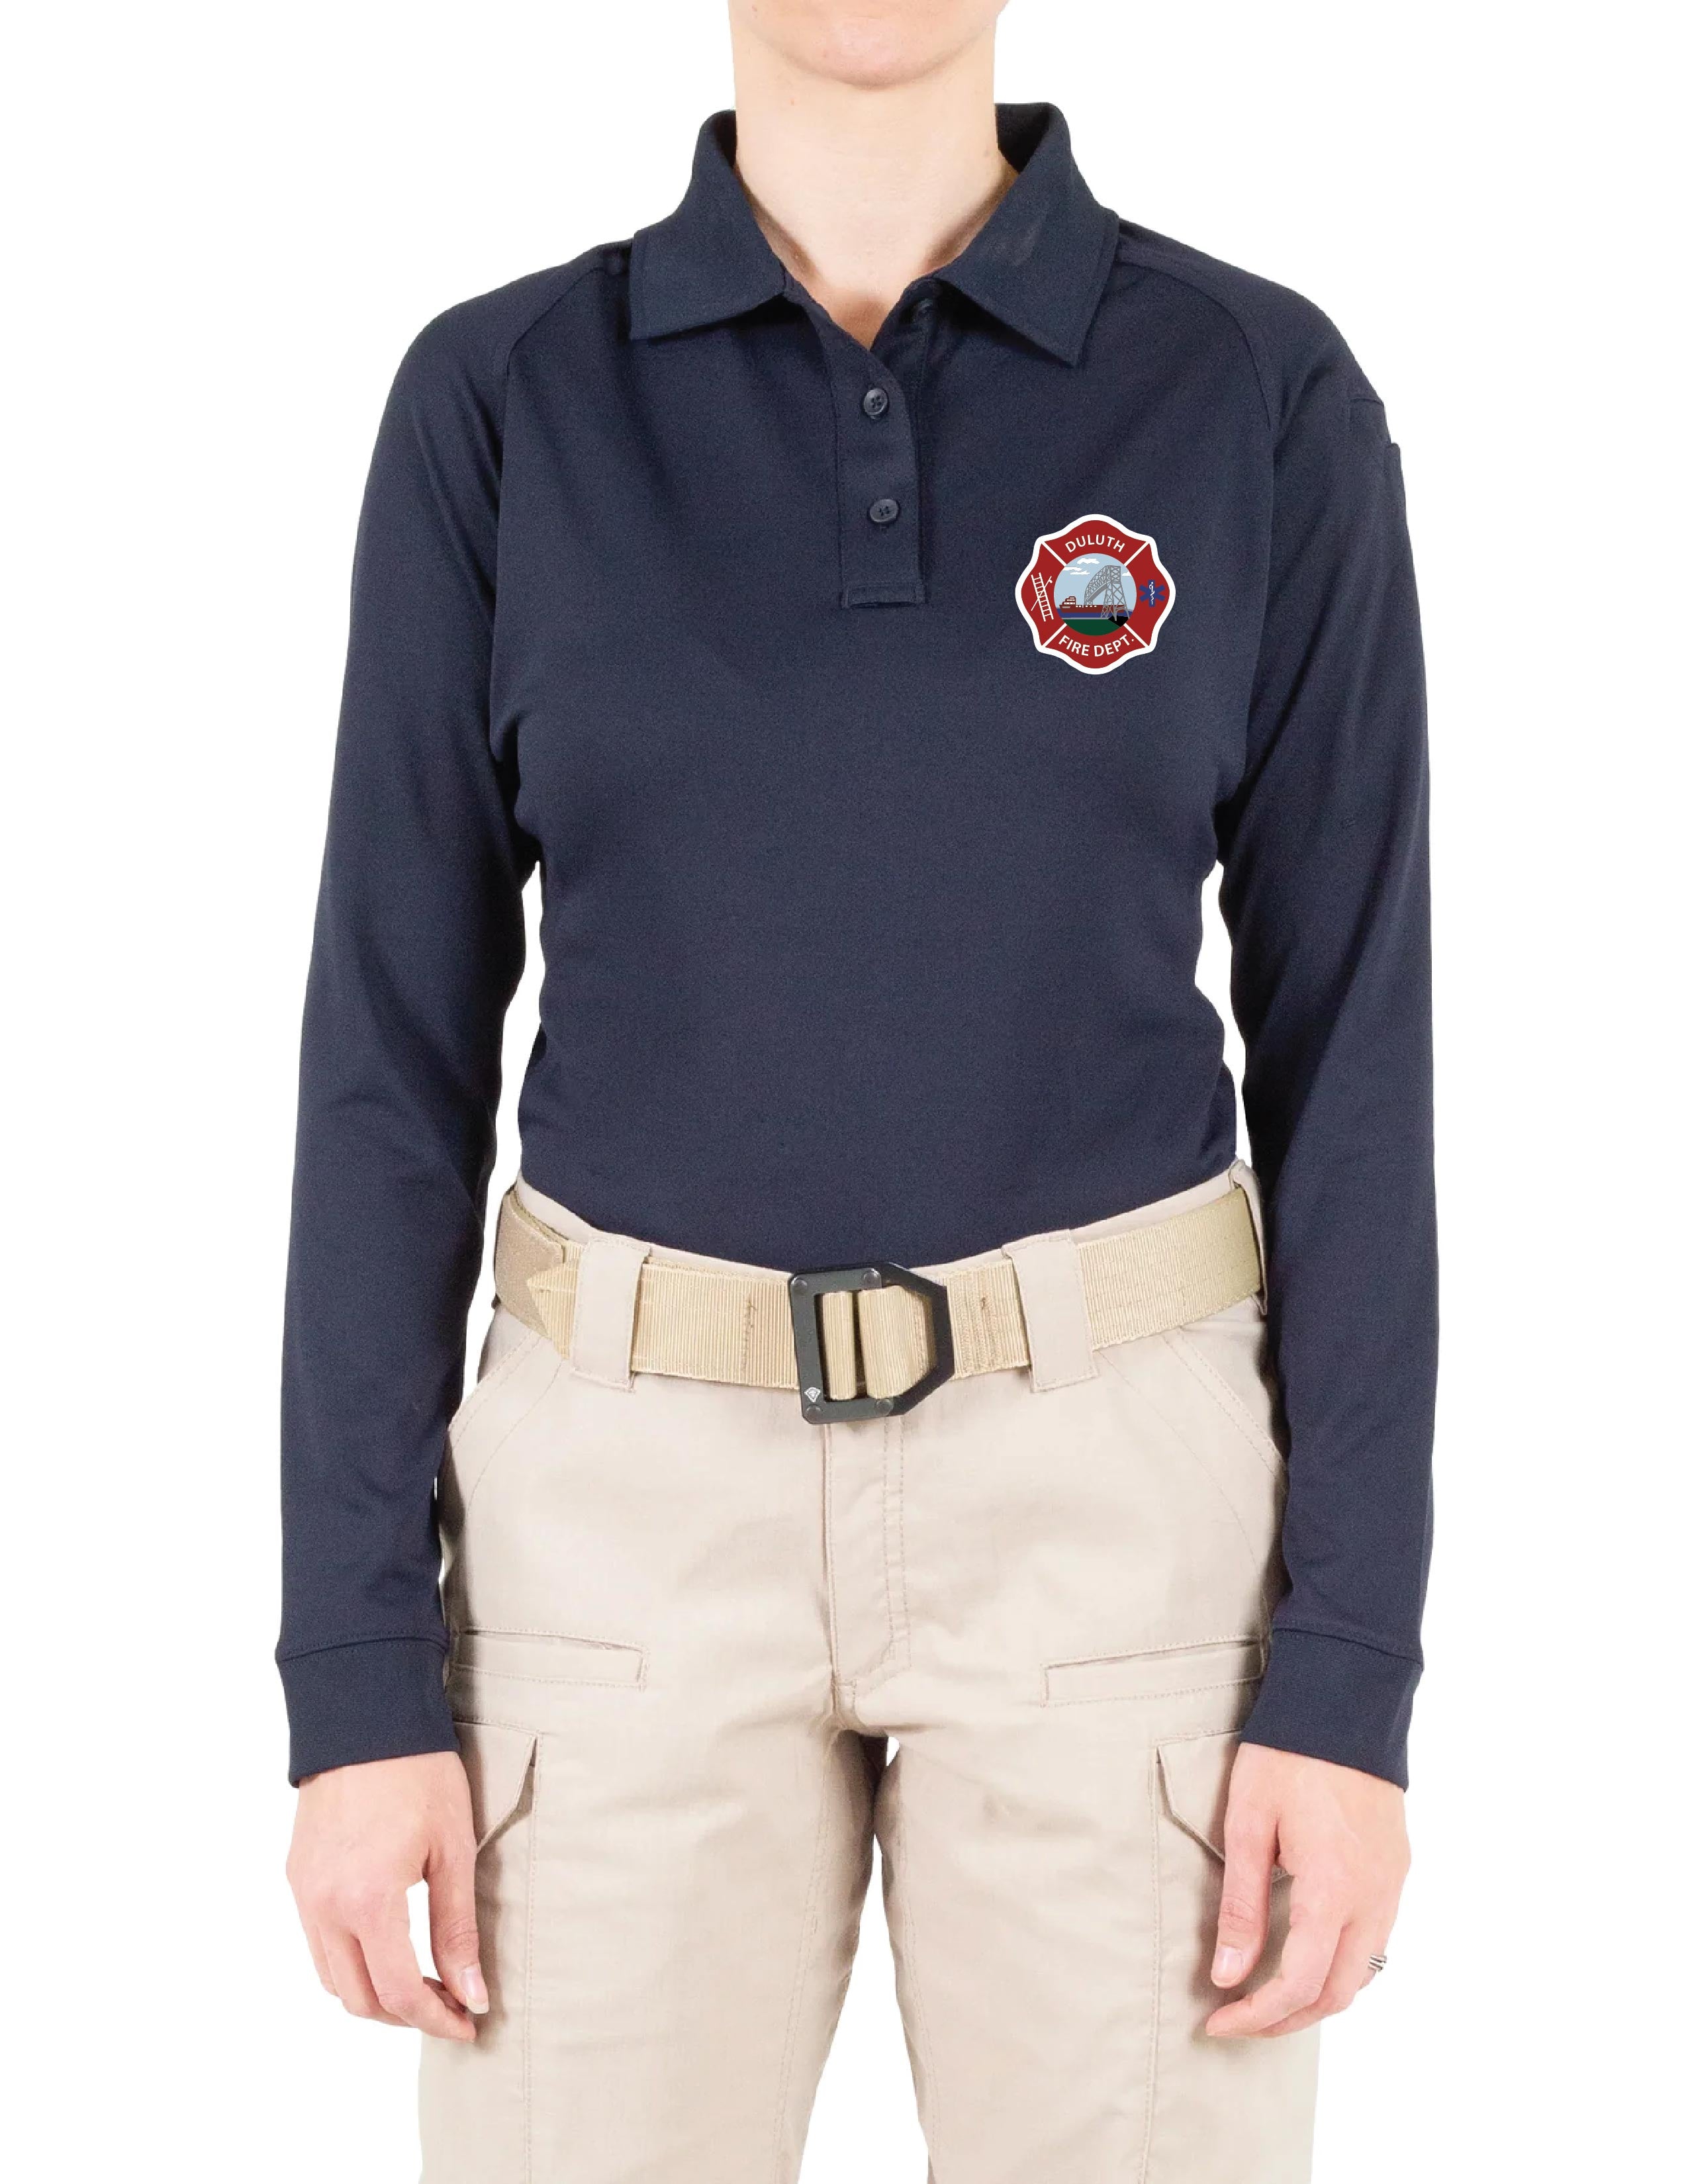 I) STYLE # 121503 WOMENS FIRST TACTICAL PERFORMANCE LONG SLEEVE POLO